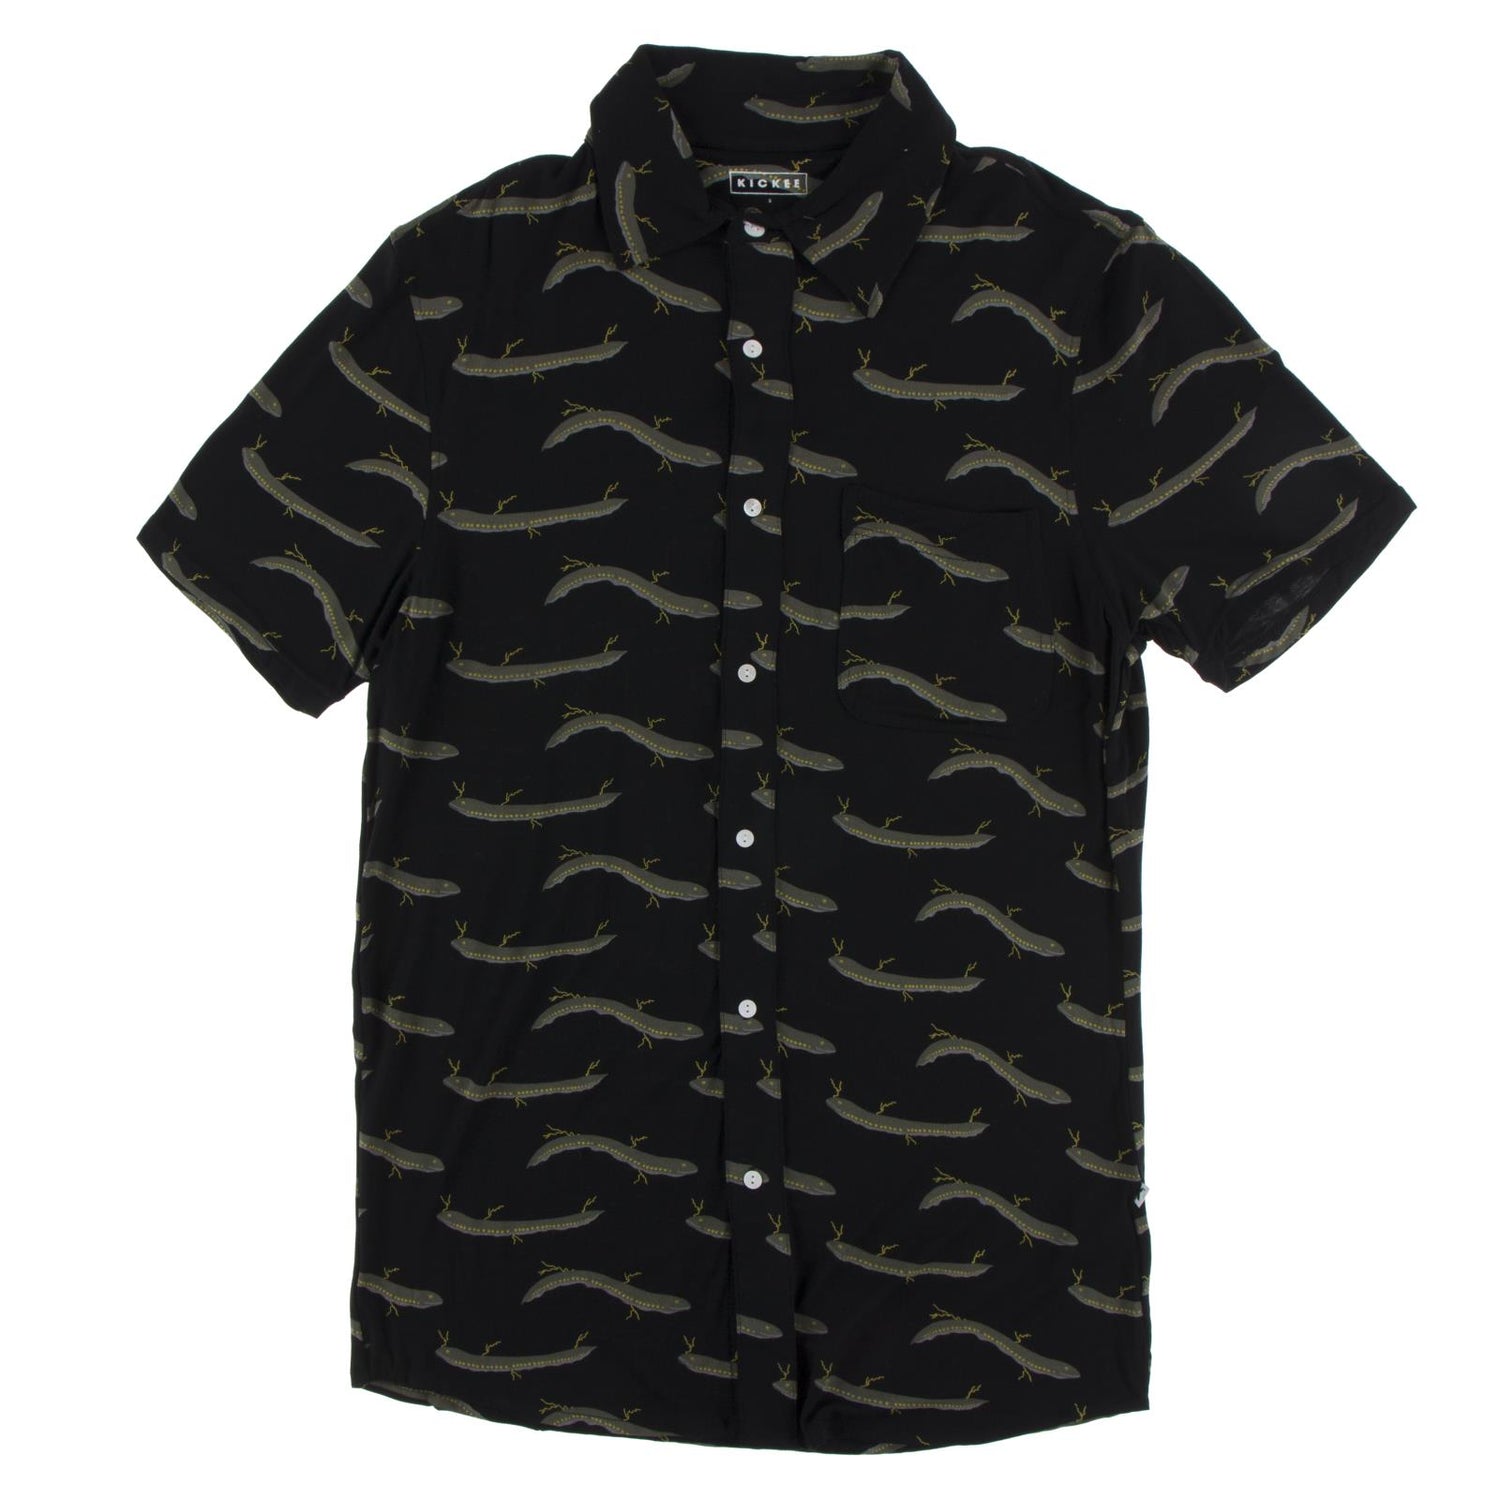 Men's Print Short Sleeve Button Down Shirt in Midnight Electric Eels